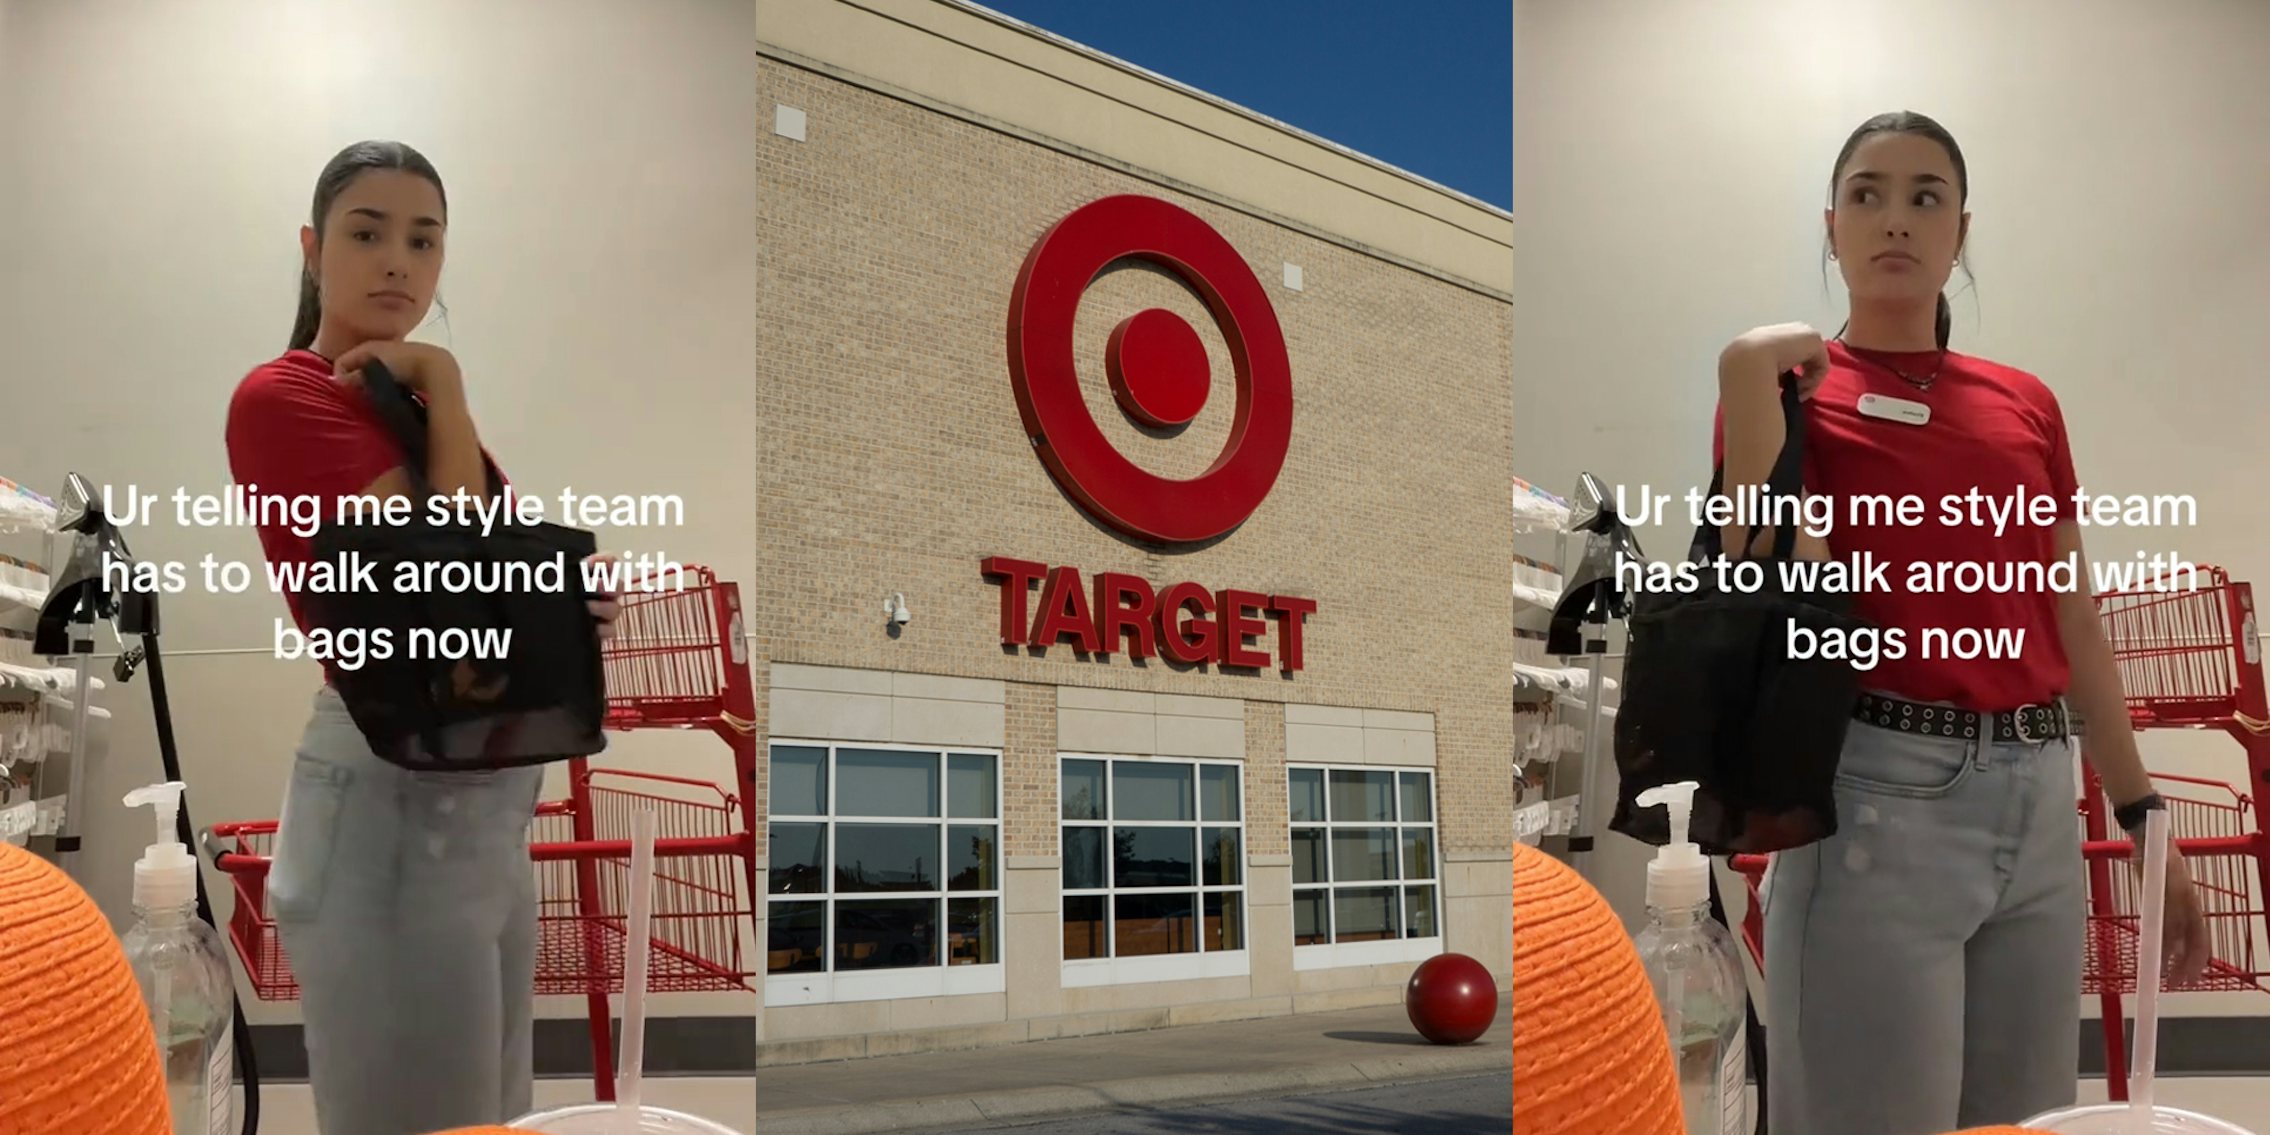 Target employee with bag with caption 'Ur telling me style team has to walk around with bags now' (l) Target building with sign (c) Target employee with bag with caption 'Ur telling me style team has to walk around with bags now' (r)